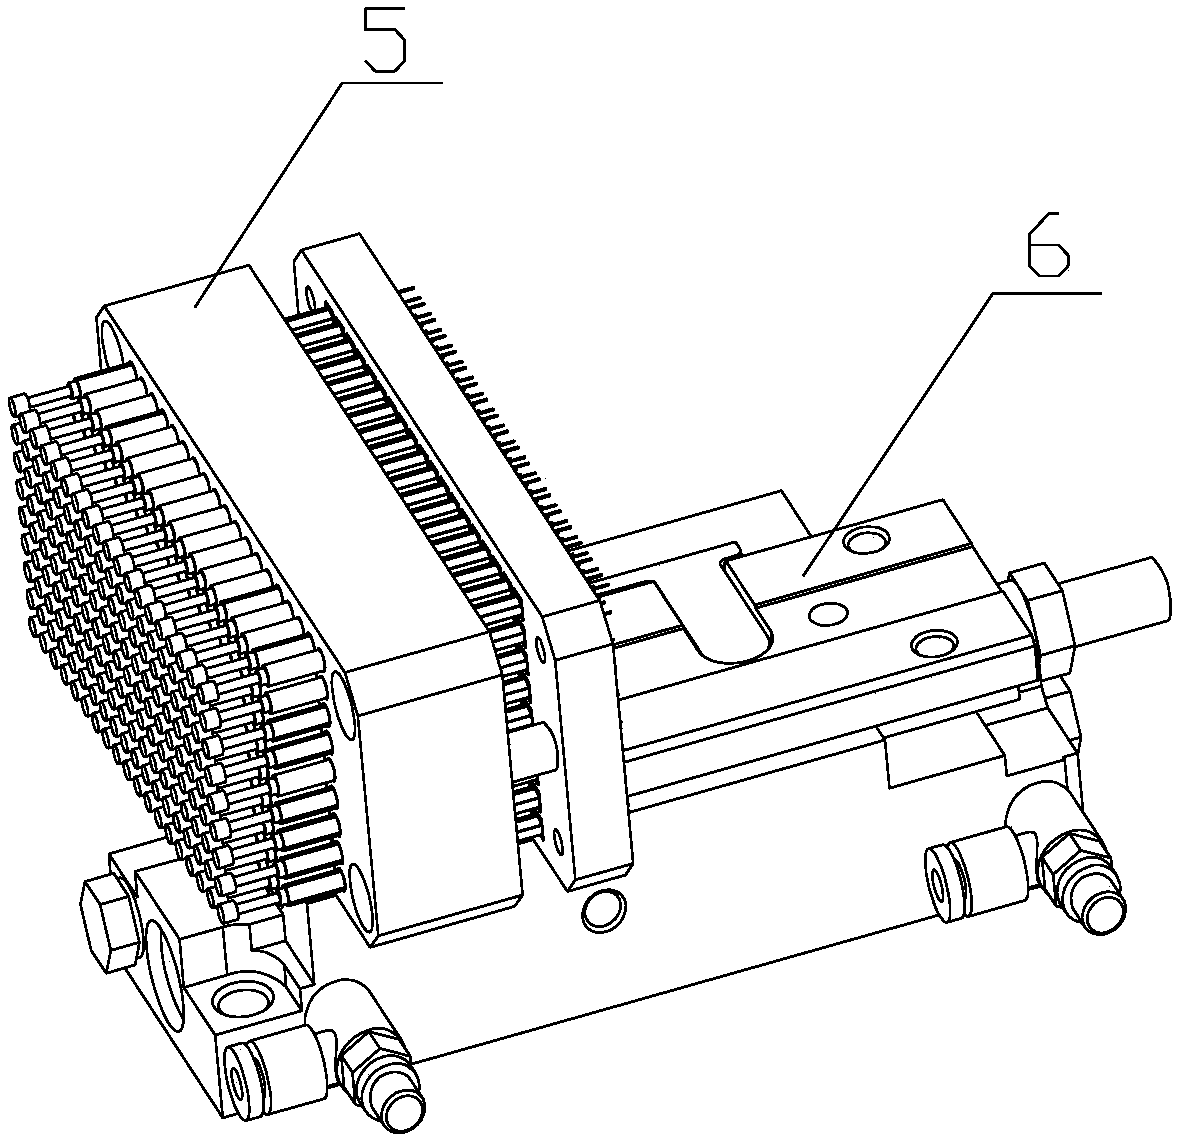 Product positioning device and method